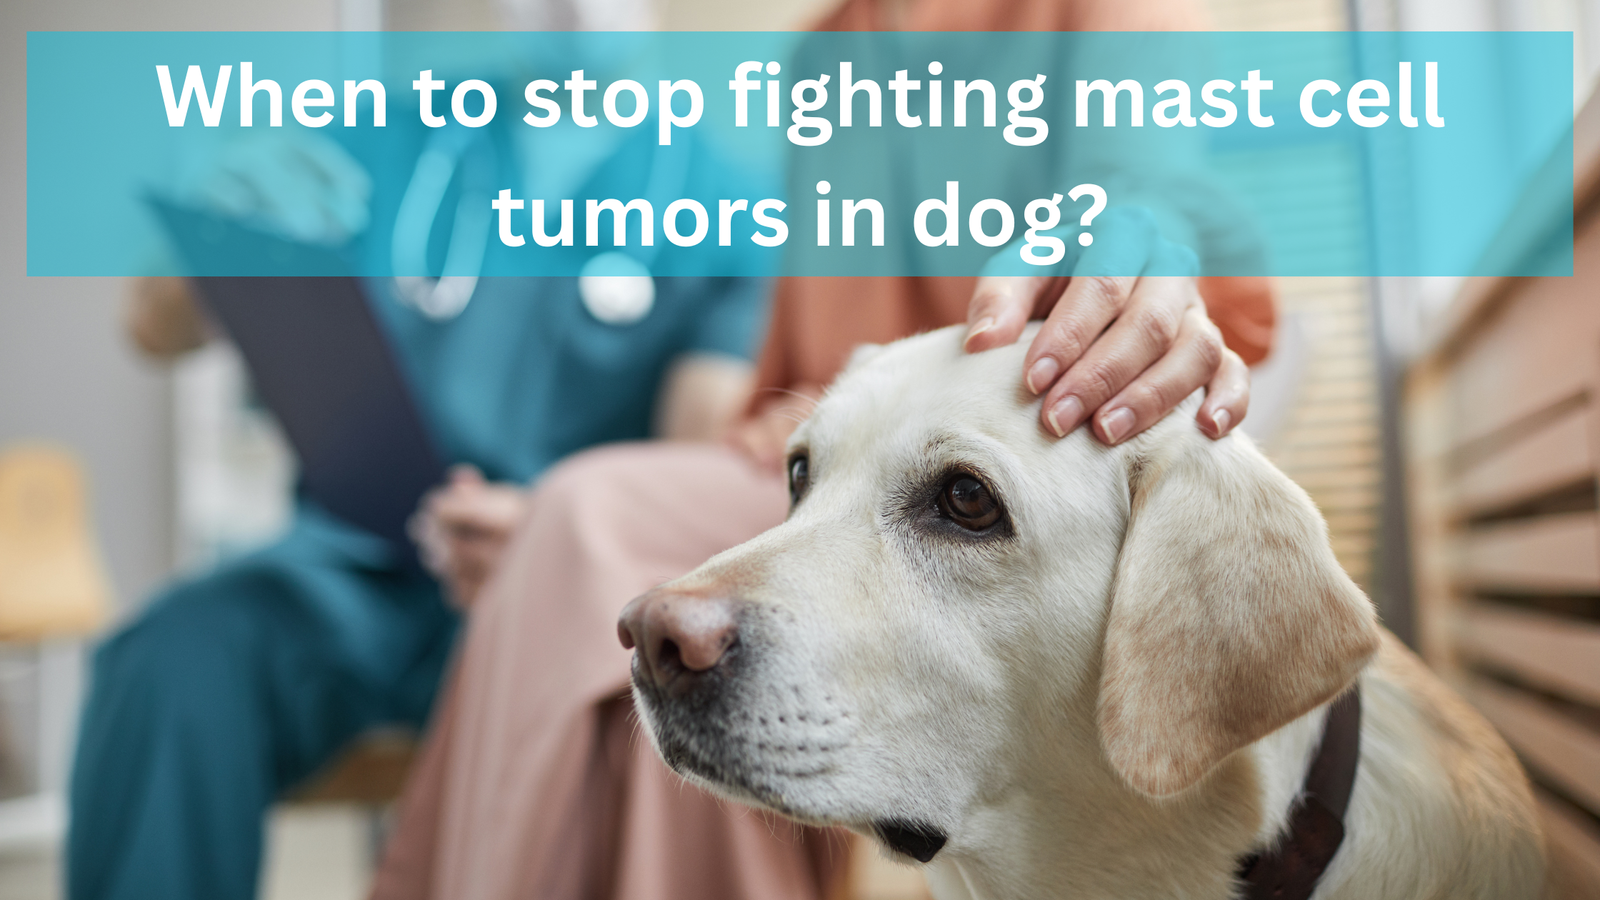 When to stop fighting mast cell tumors in dog?